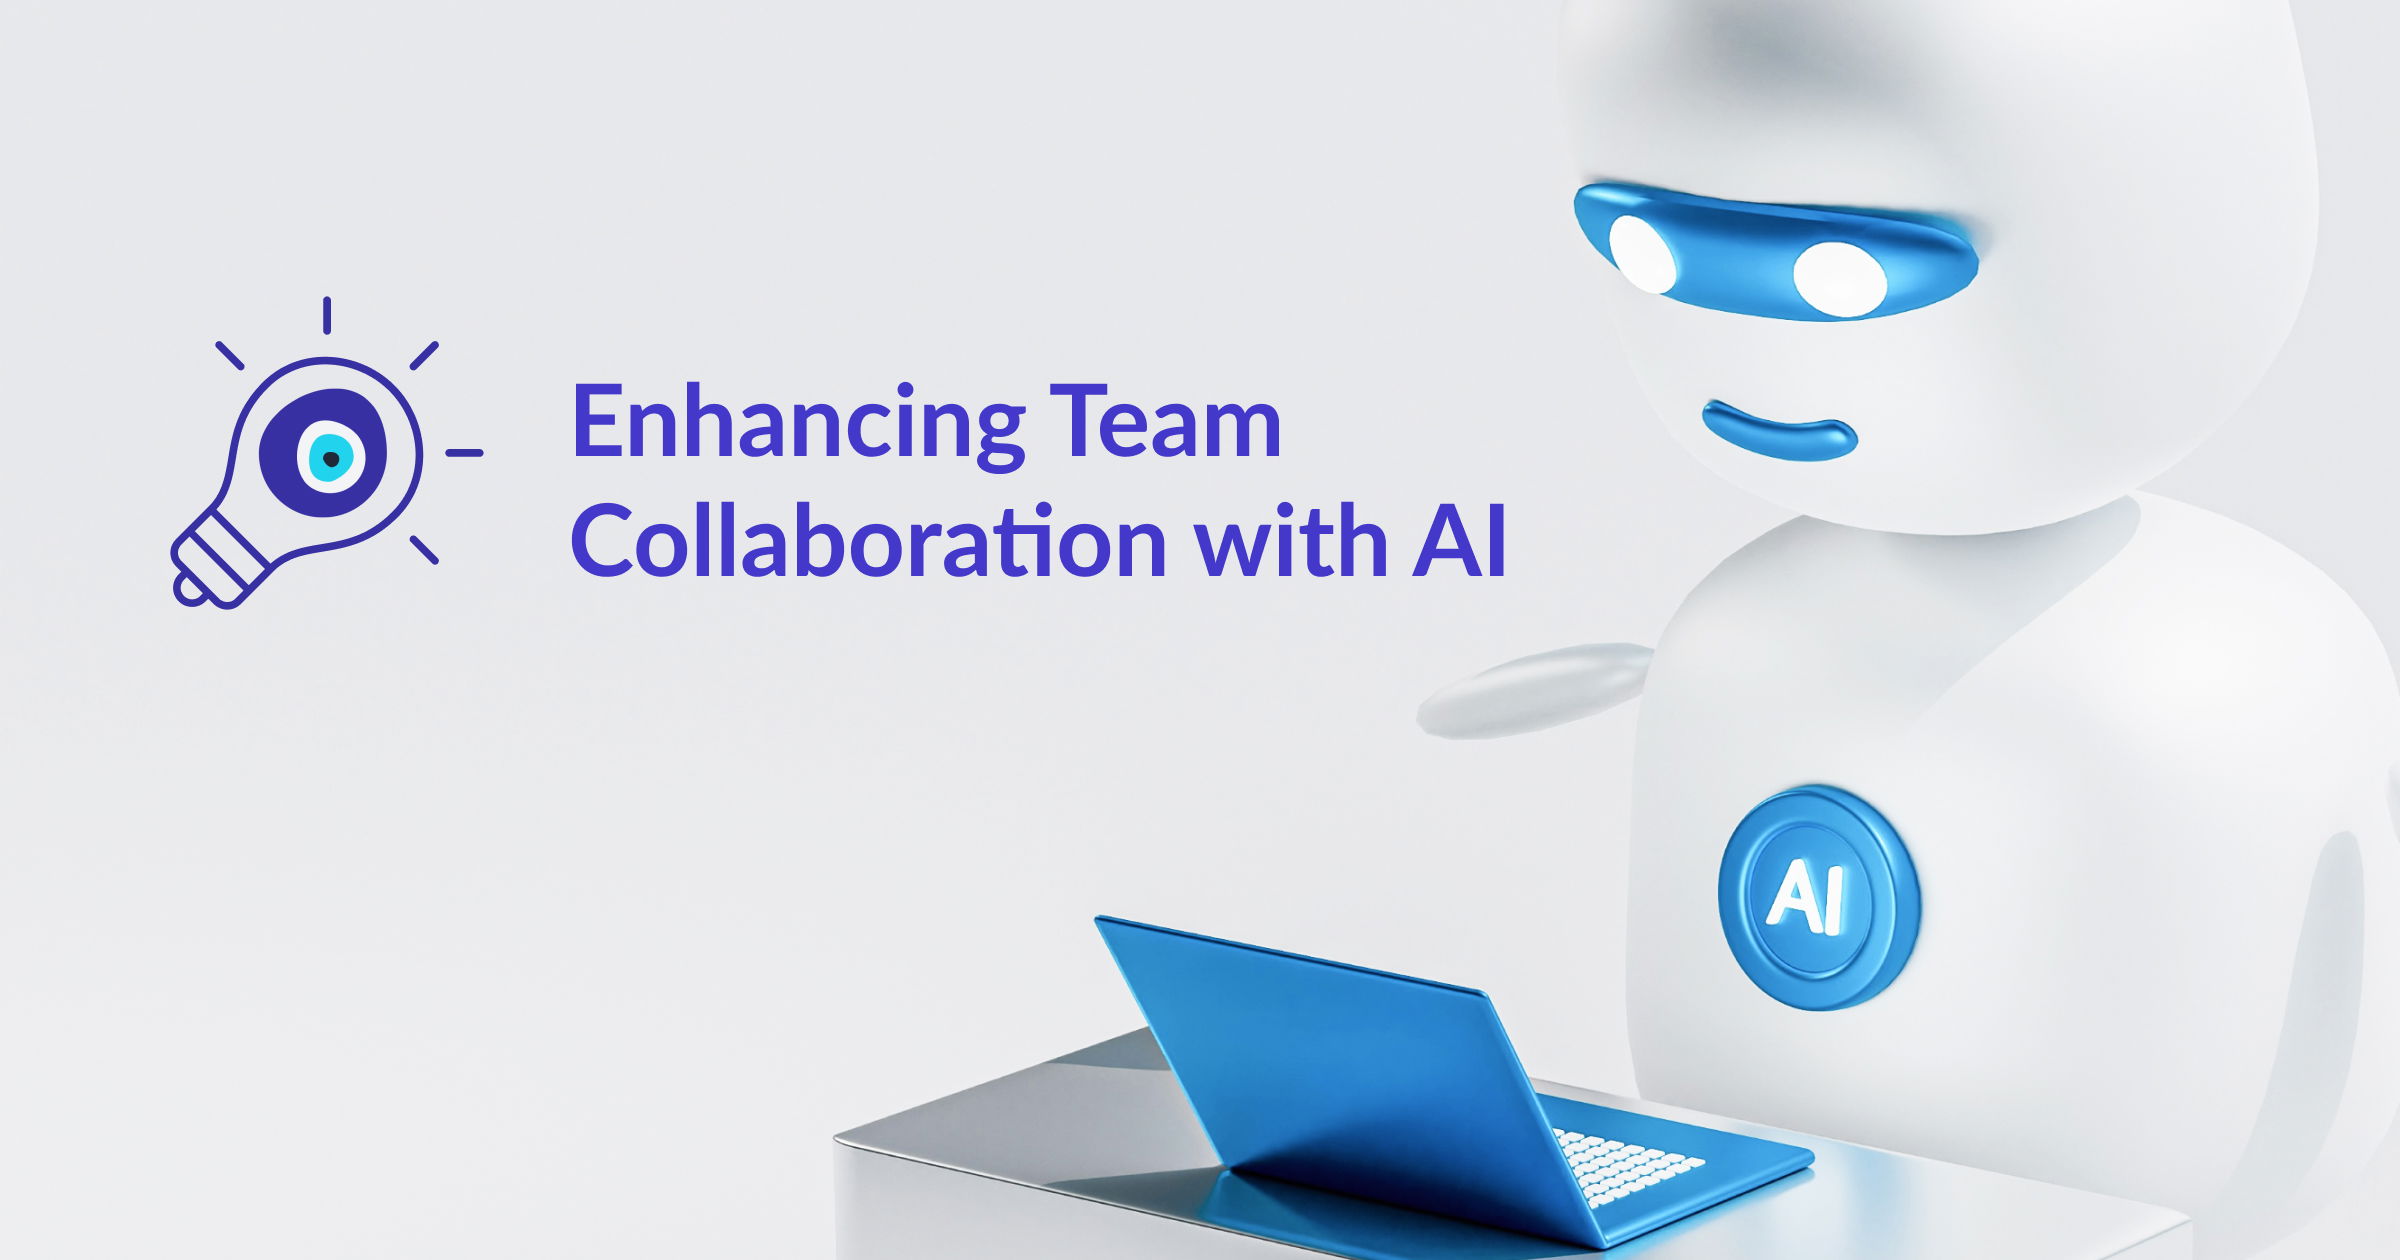 Text saying "Enhancing team collaboration with AI" and image of a robot looking at a small computer